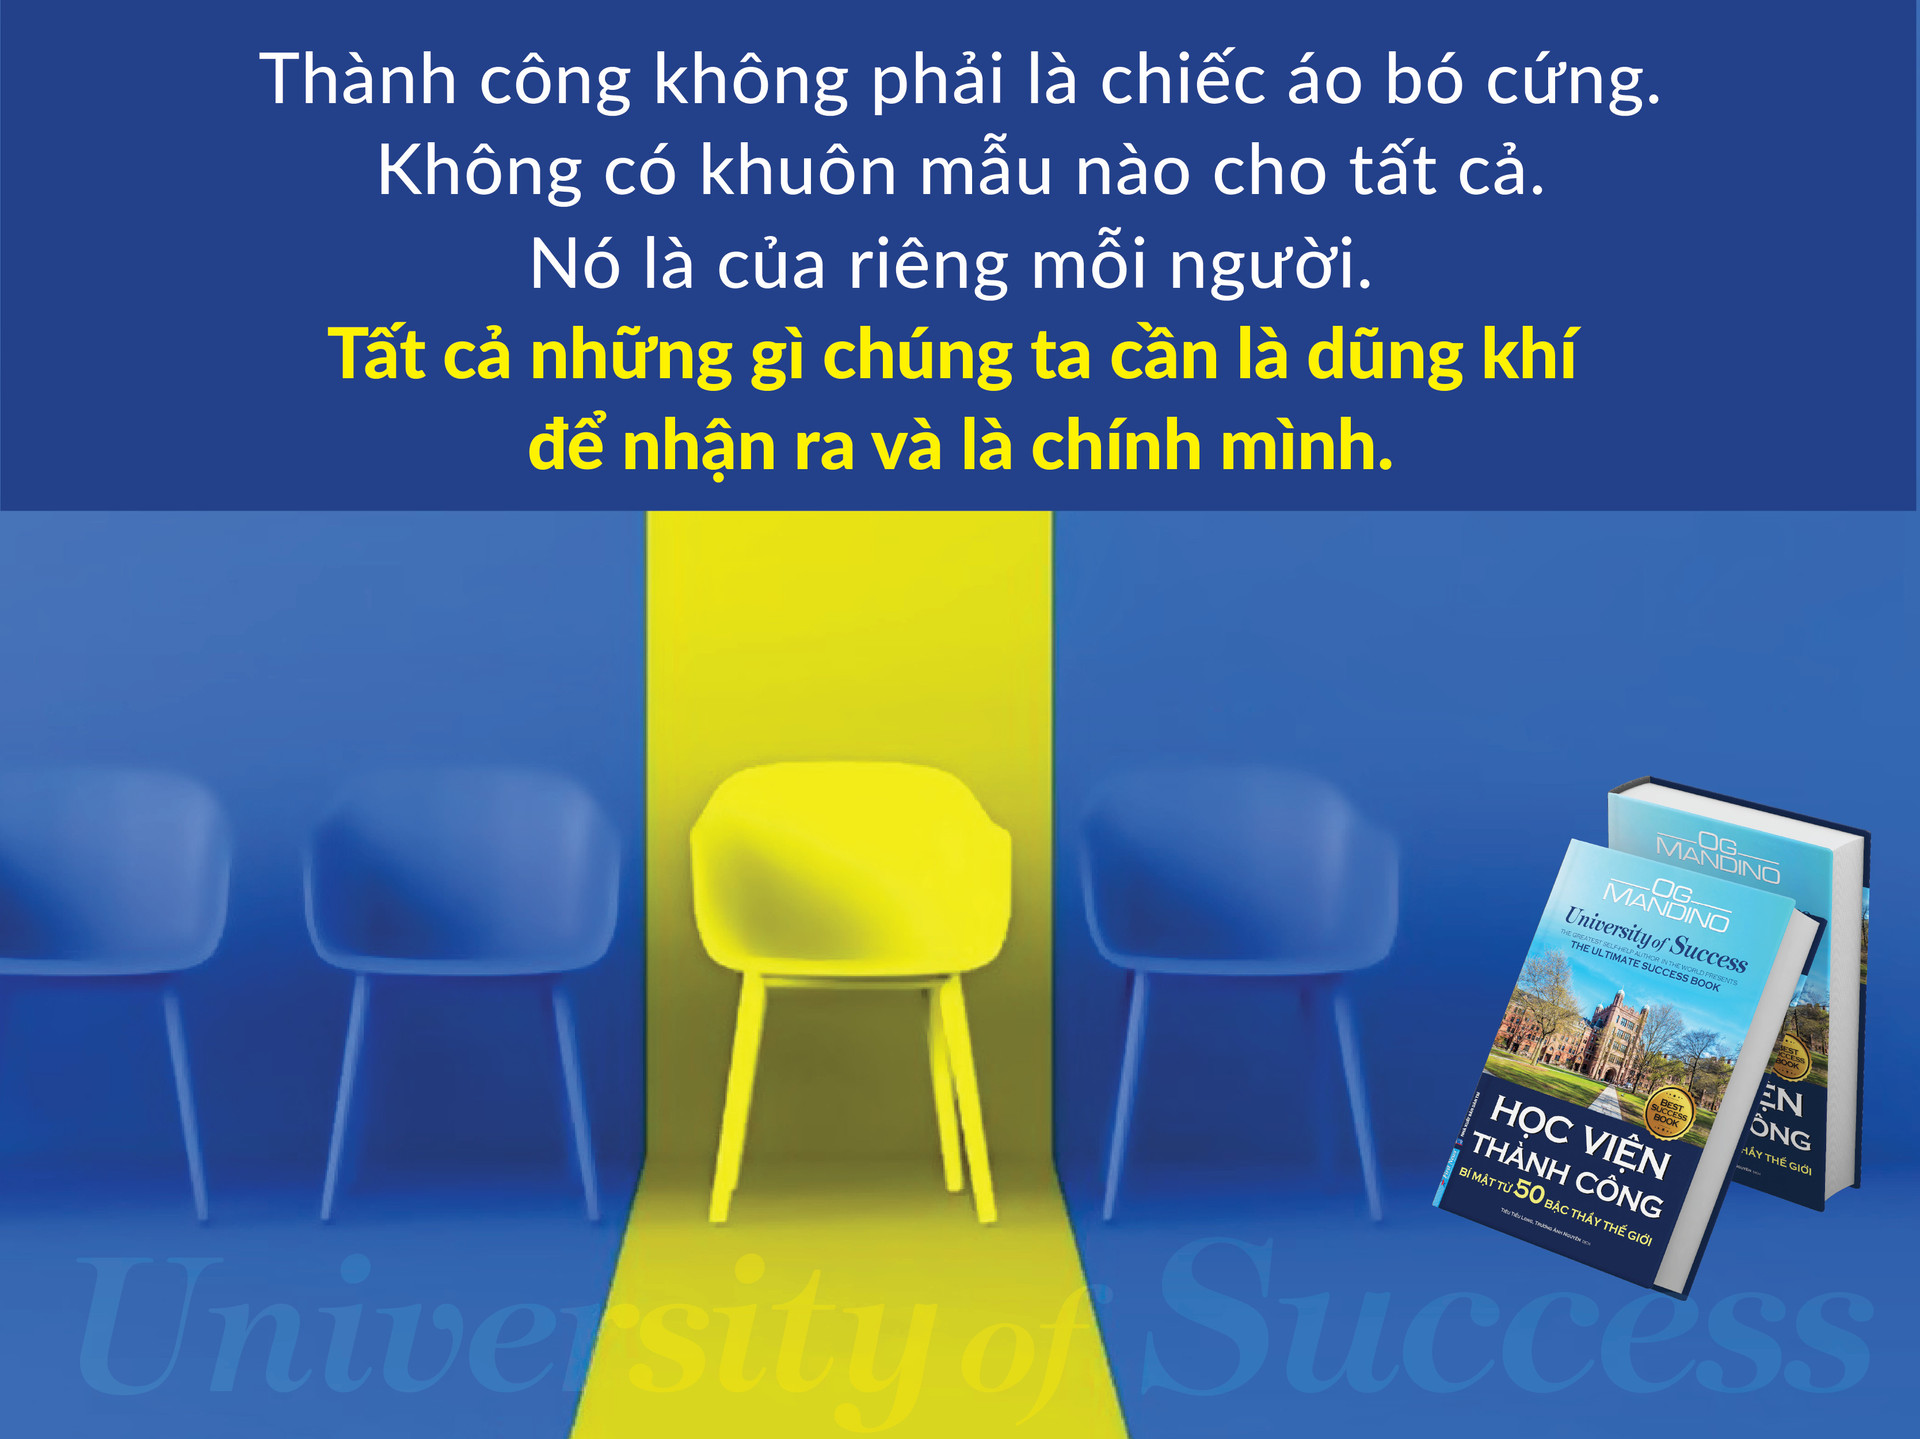 hoc-vien-thanh-cong-quote-3.jpg